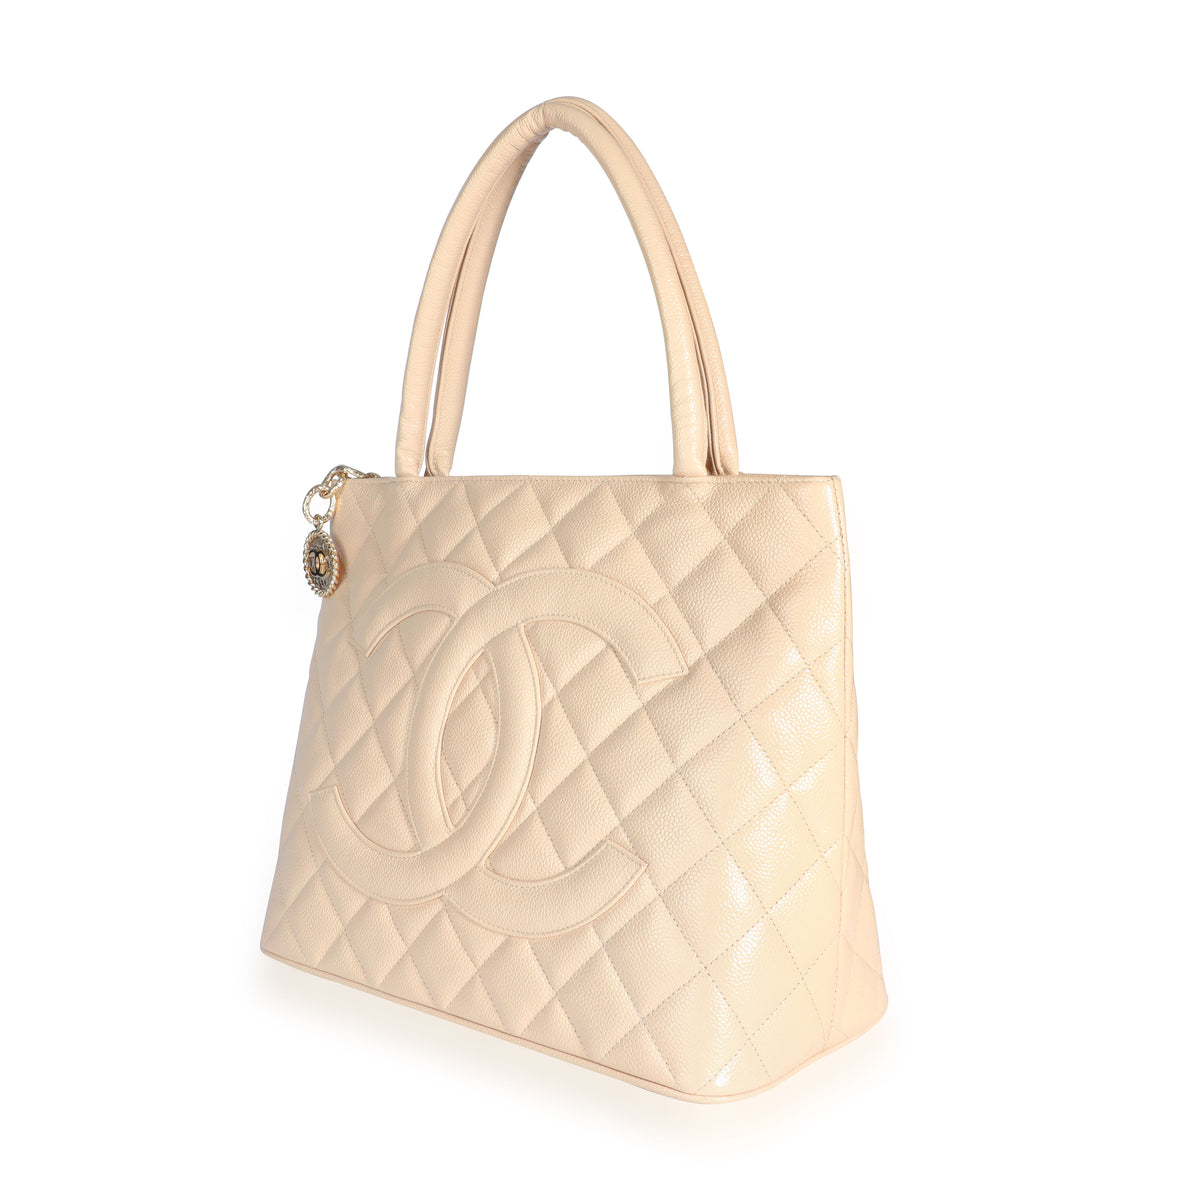 Chanel Beige Quilted Caviar Leather Medallion Tote Bag Chanel